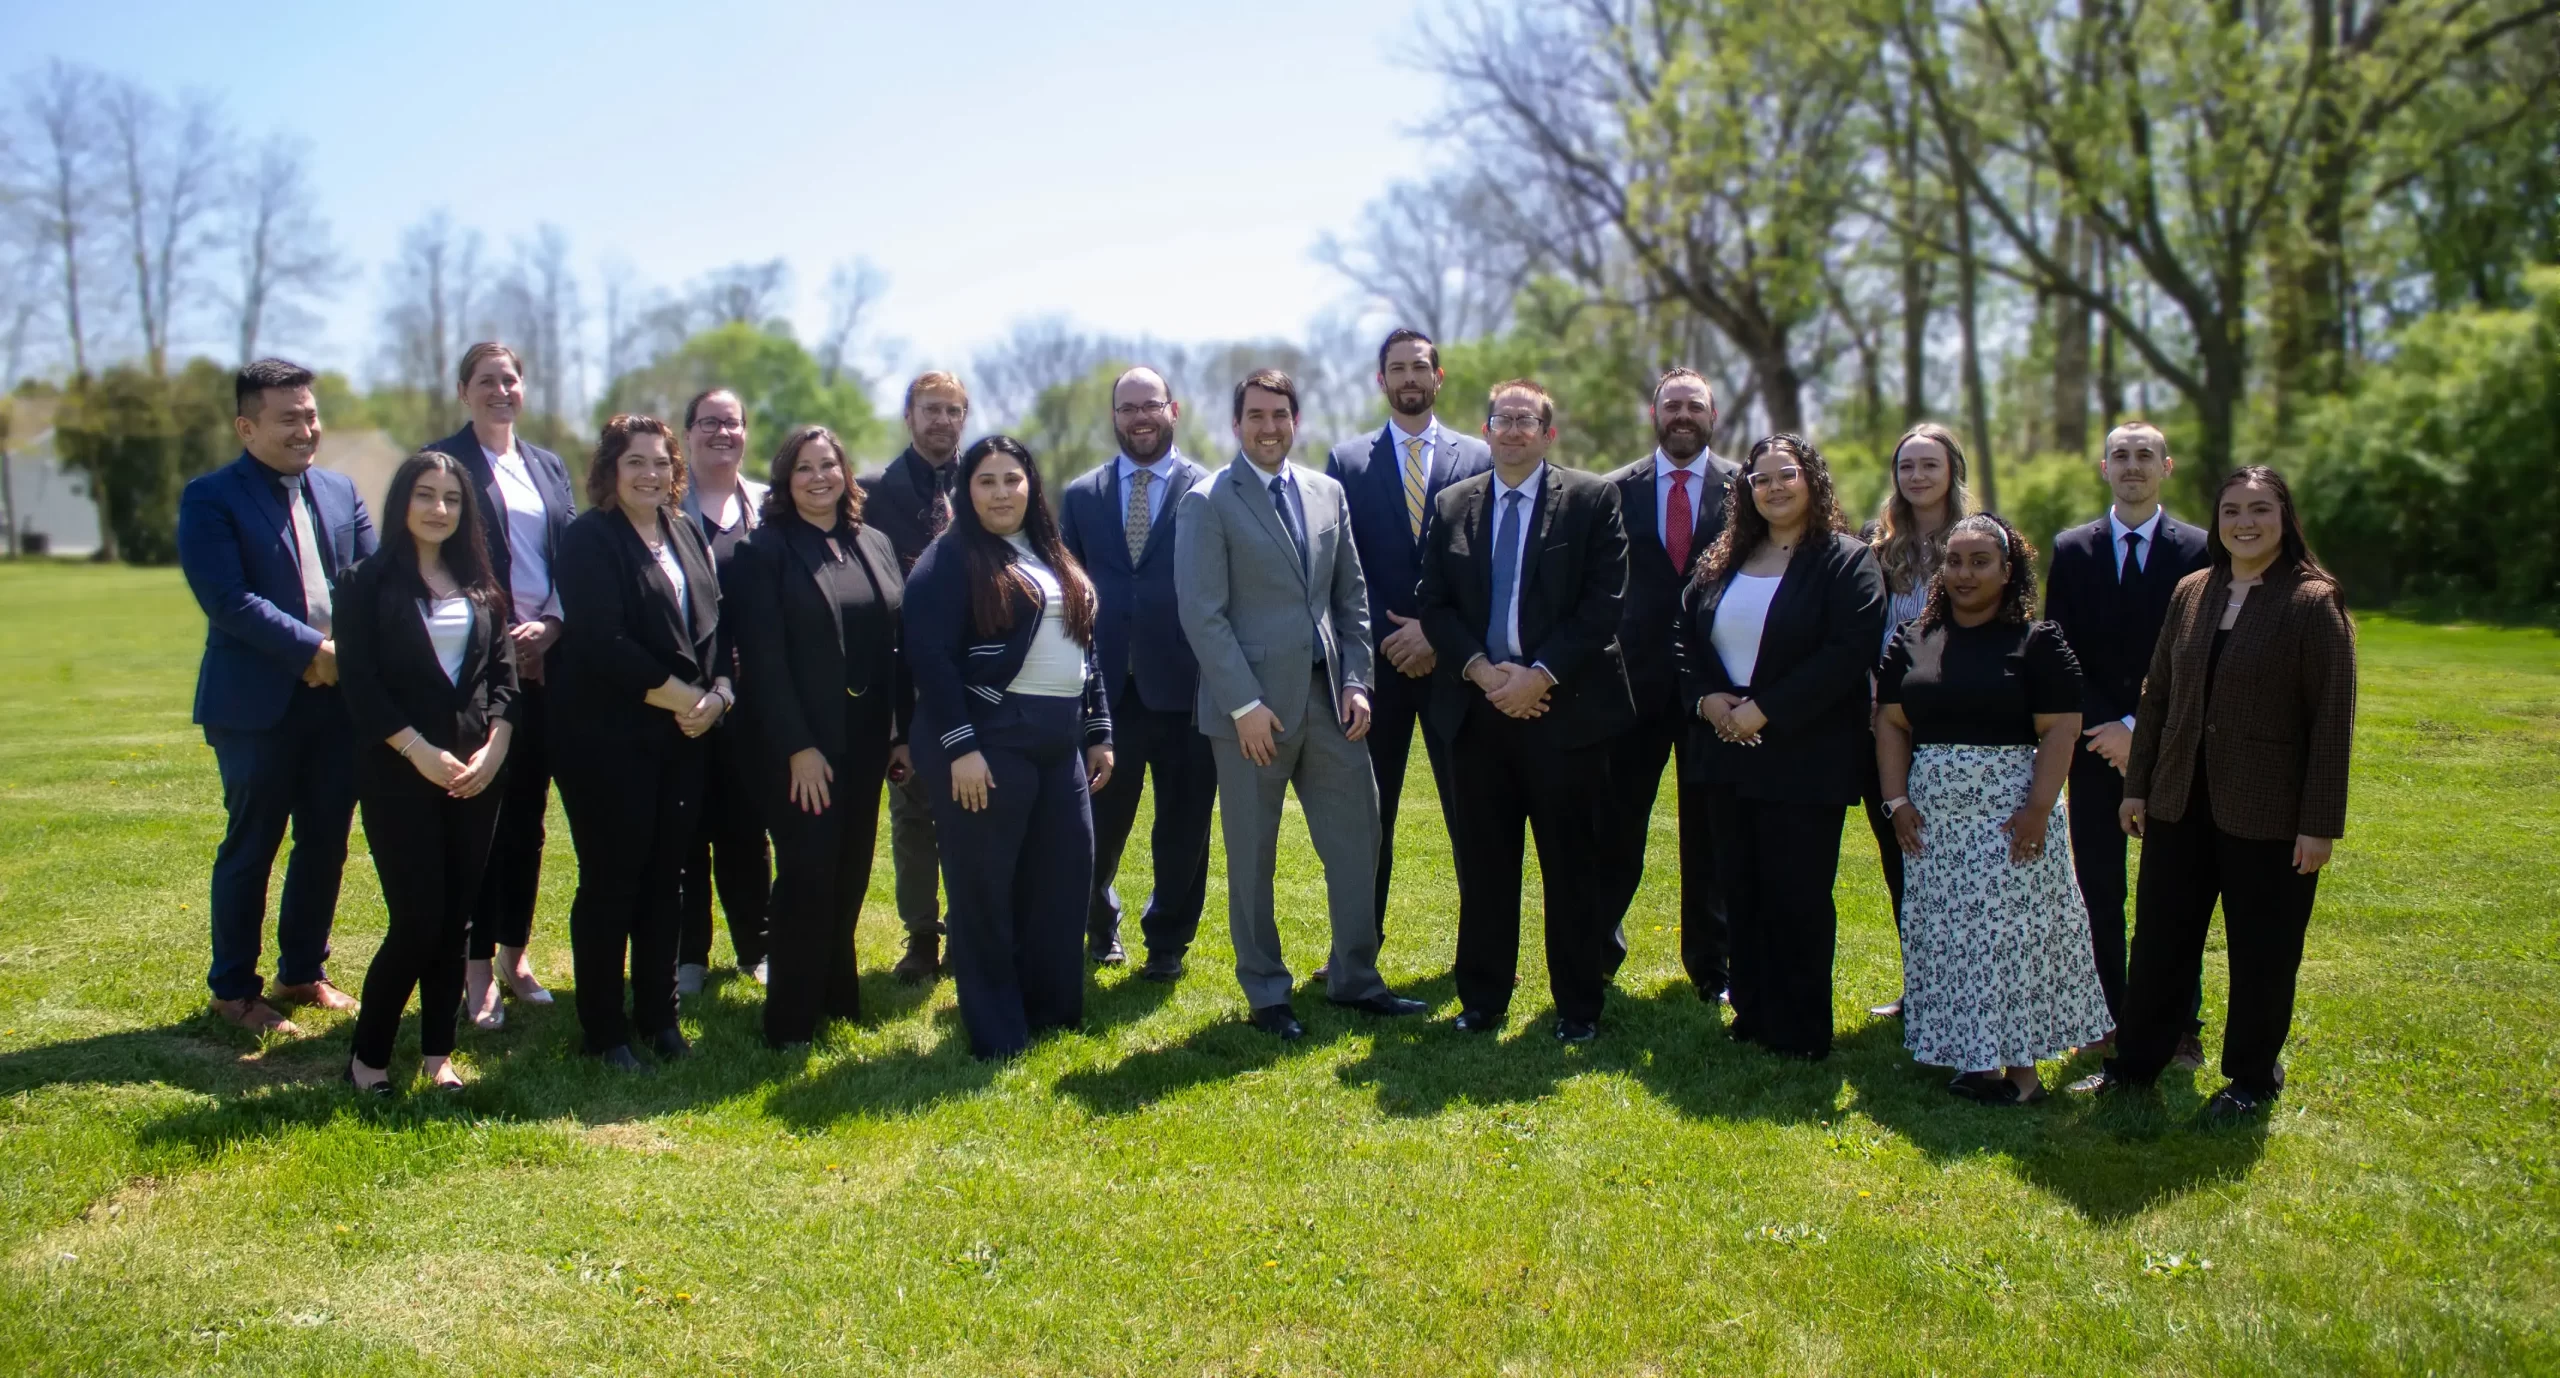 A group picture of the attorneys at staff from Cornerstone Law Firm. They're standing in a field on a sunny day.